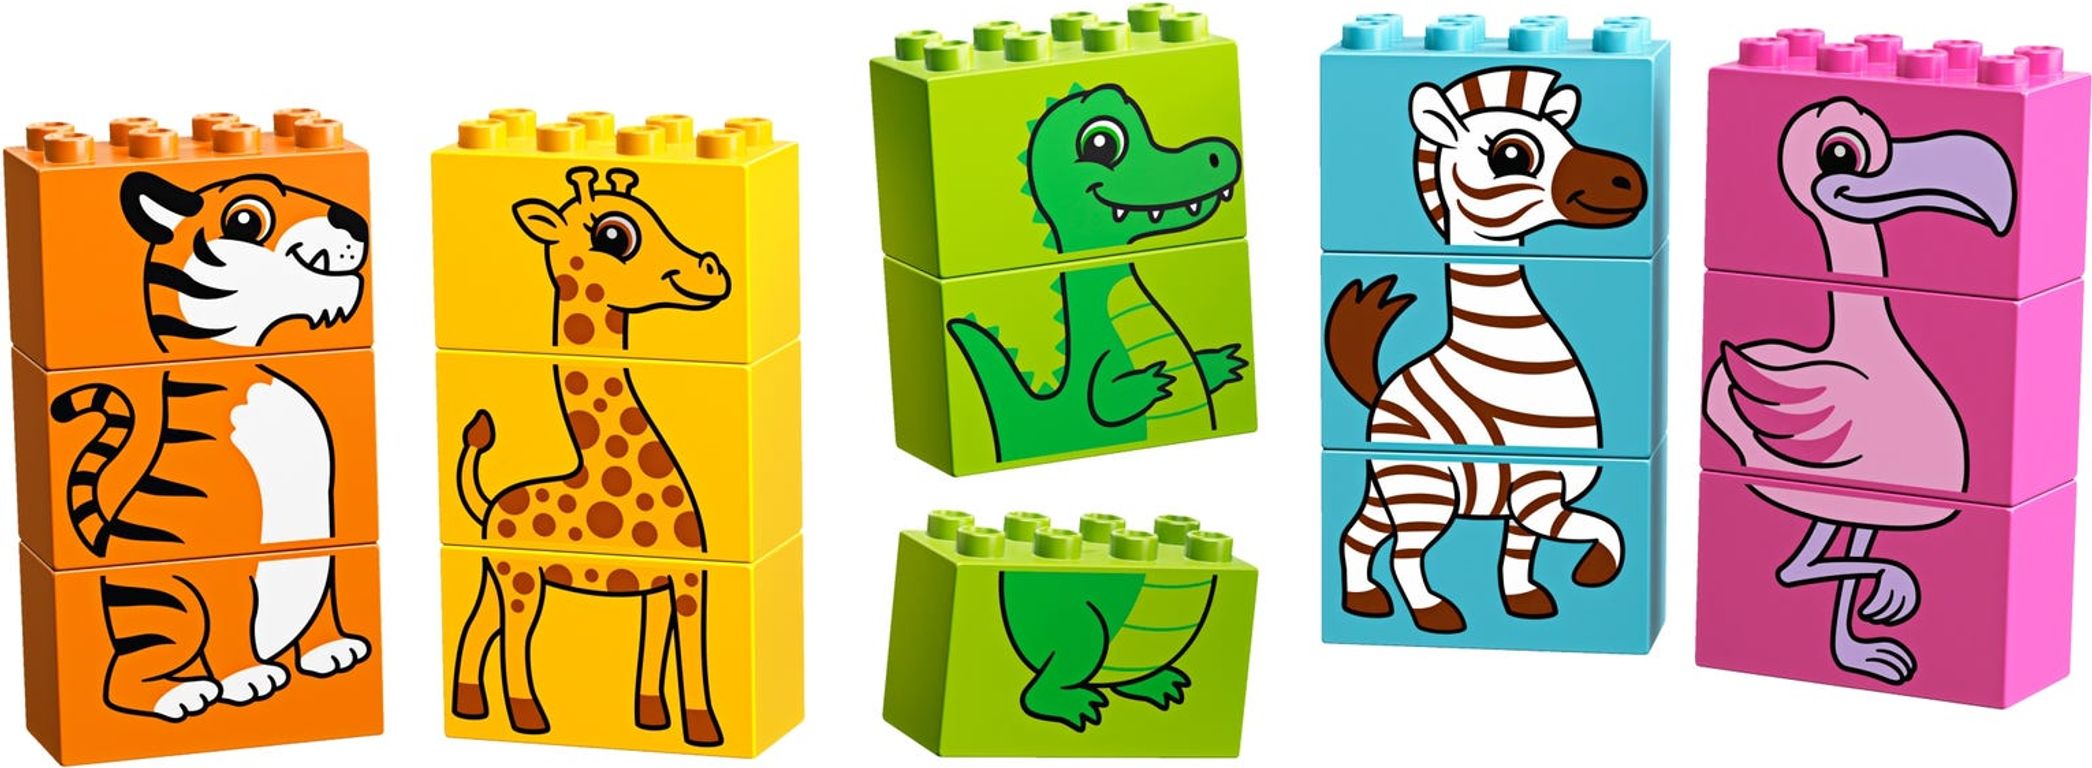 LEGO® DUPLO® My First Fun Puzzle components